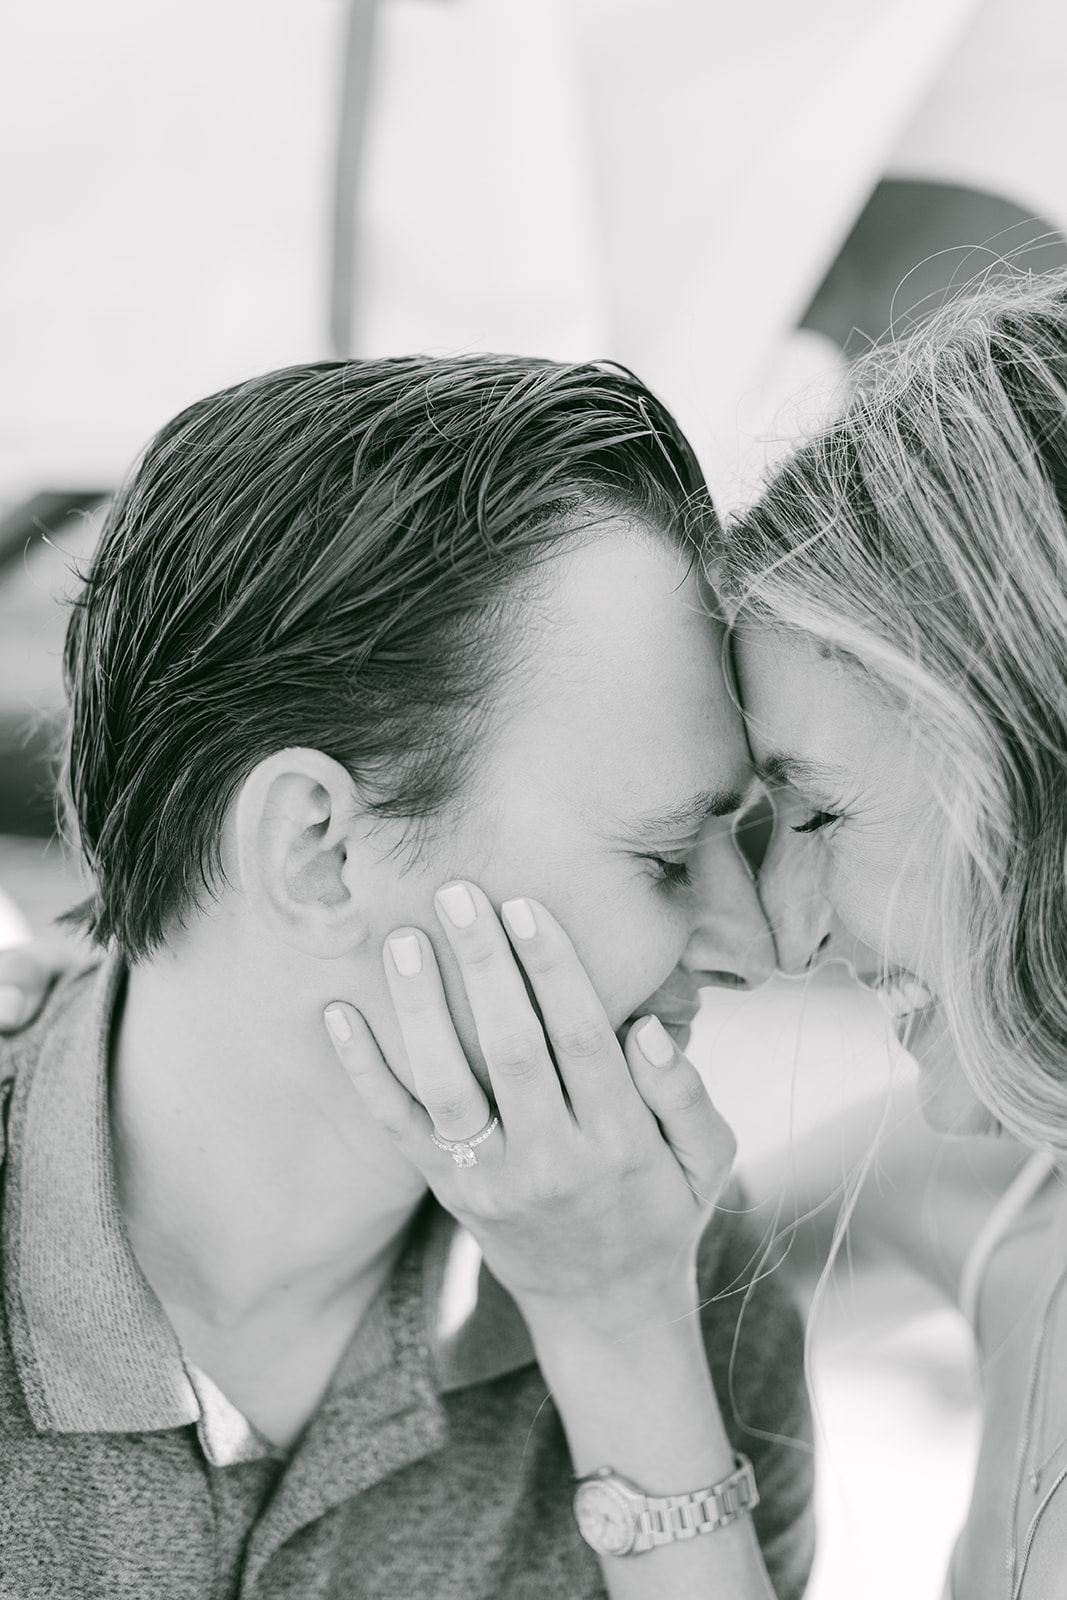 detail shot of engaged couple sharing a close moment